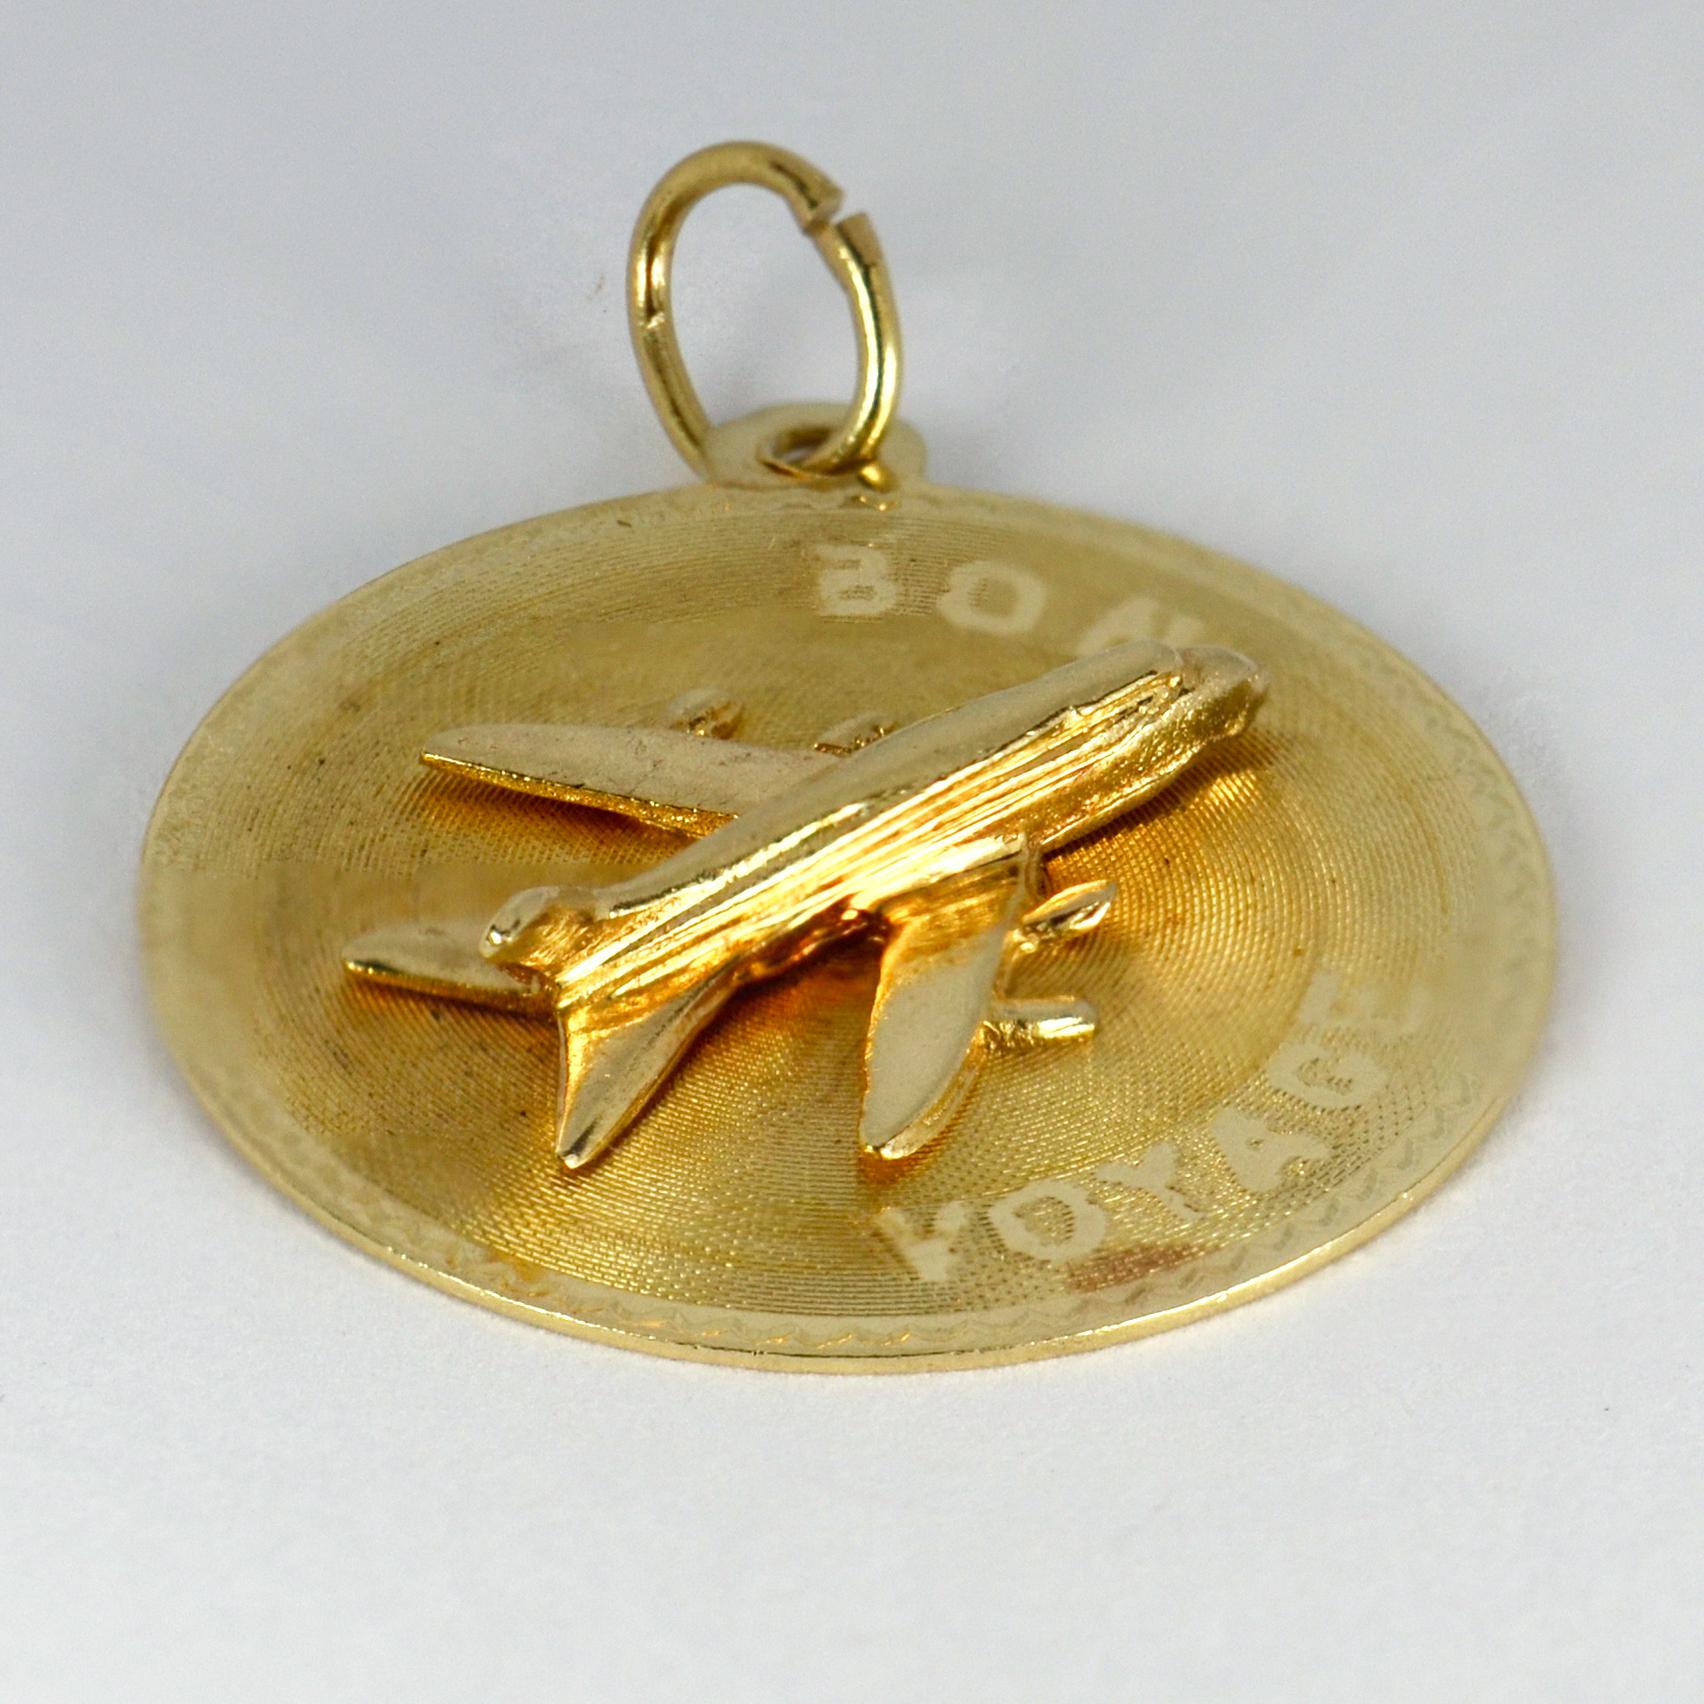 A 14 karat (14K) yellow gold charm pendant designed as a round disc supporting an airplane, with the message ‘Bon Voyage’. Stamped 14K for 14 karat gold with unknown makers marks M&M.

Dimensions: 2.6 x 2.2 x 0.45 cm (not including jump